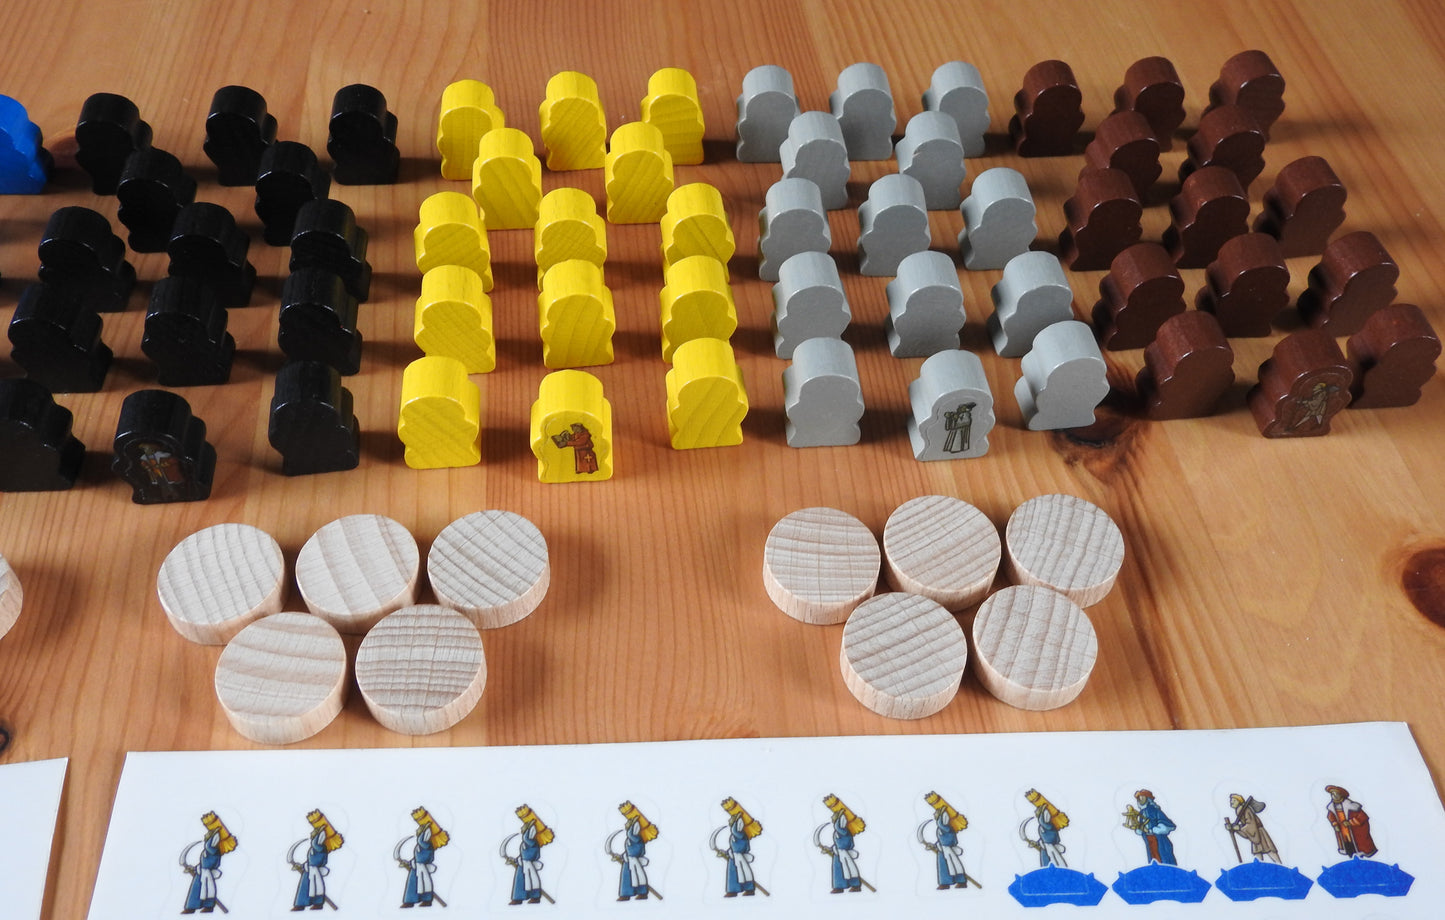 Some additional wooden figures and tokens that come in a range of colours.